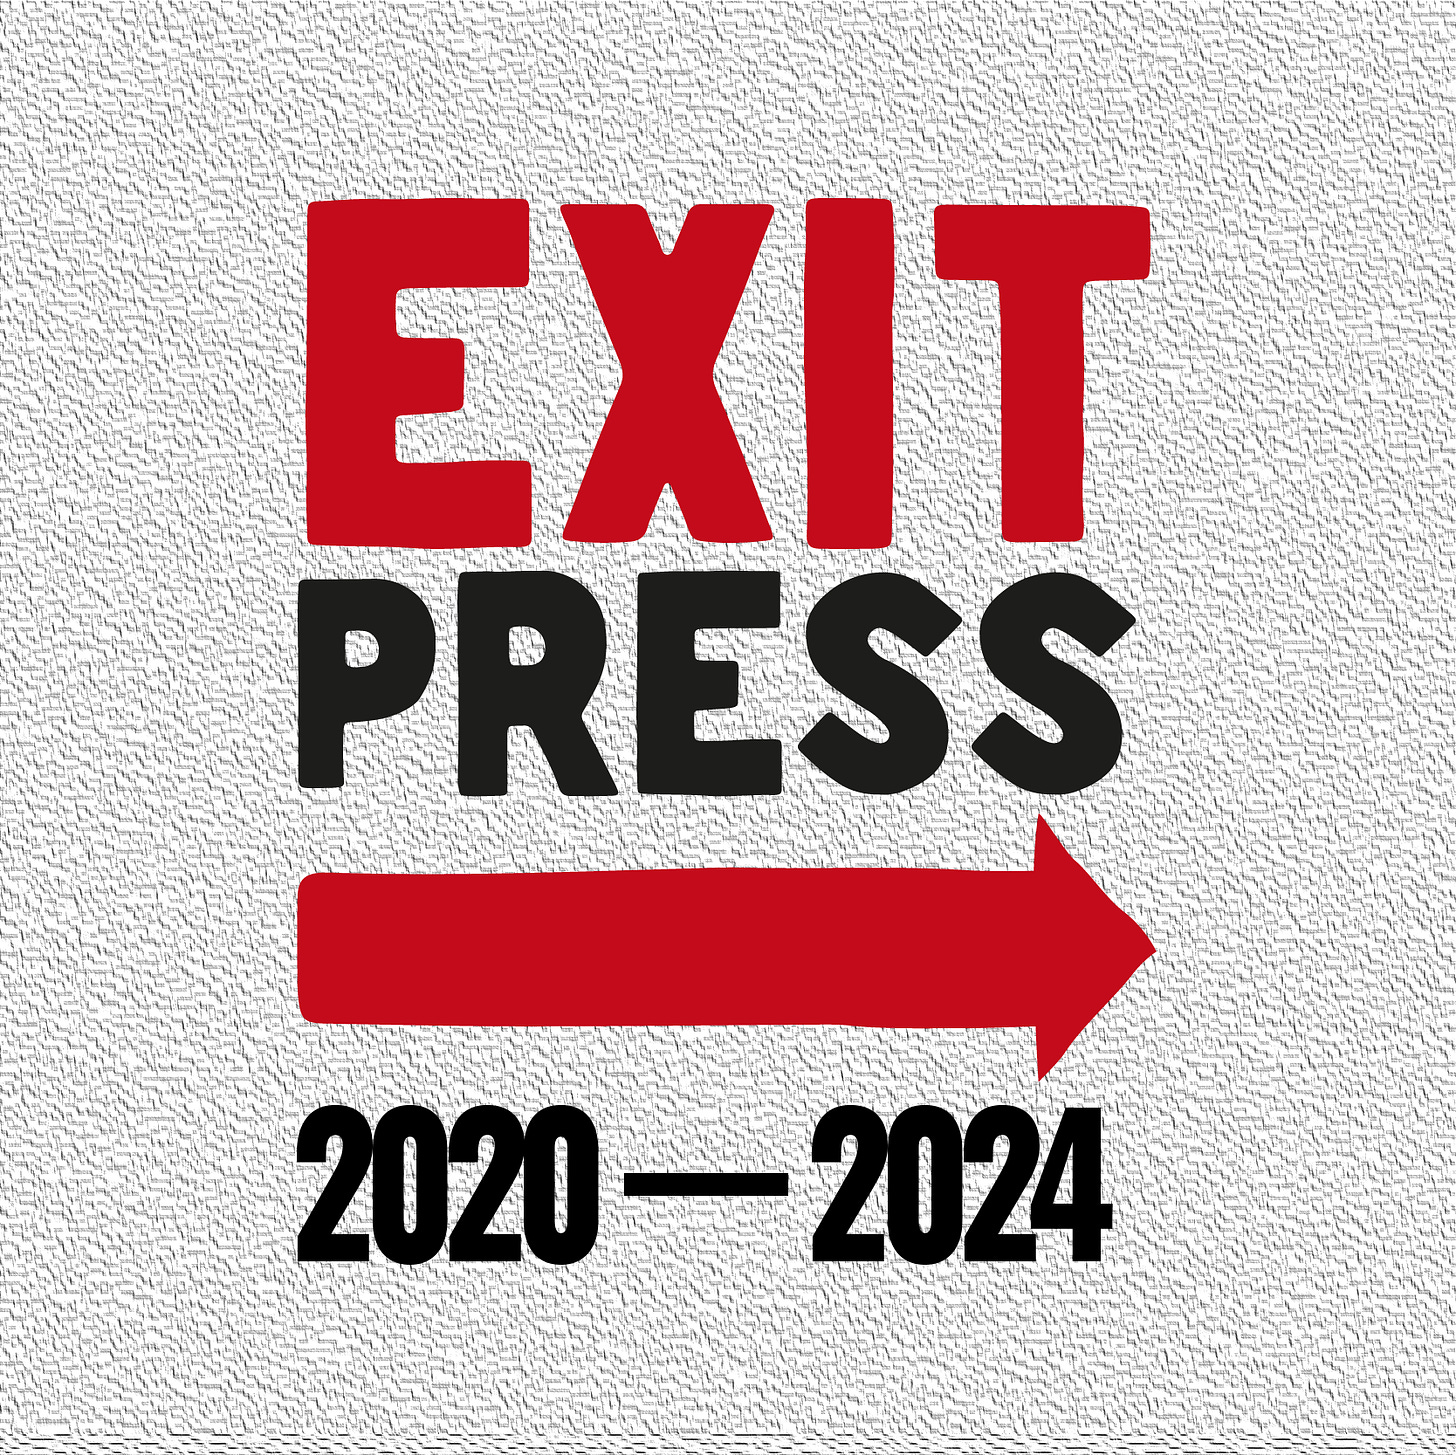 The EXIT Press logo with the additional text 2020-2024, on a textured background.